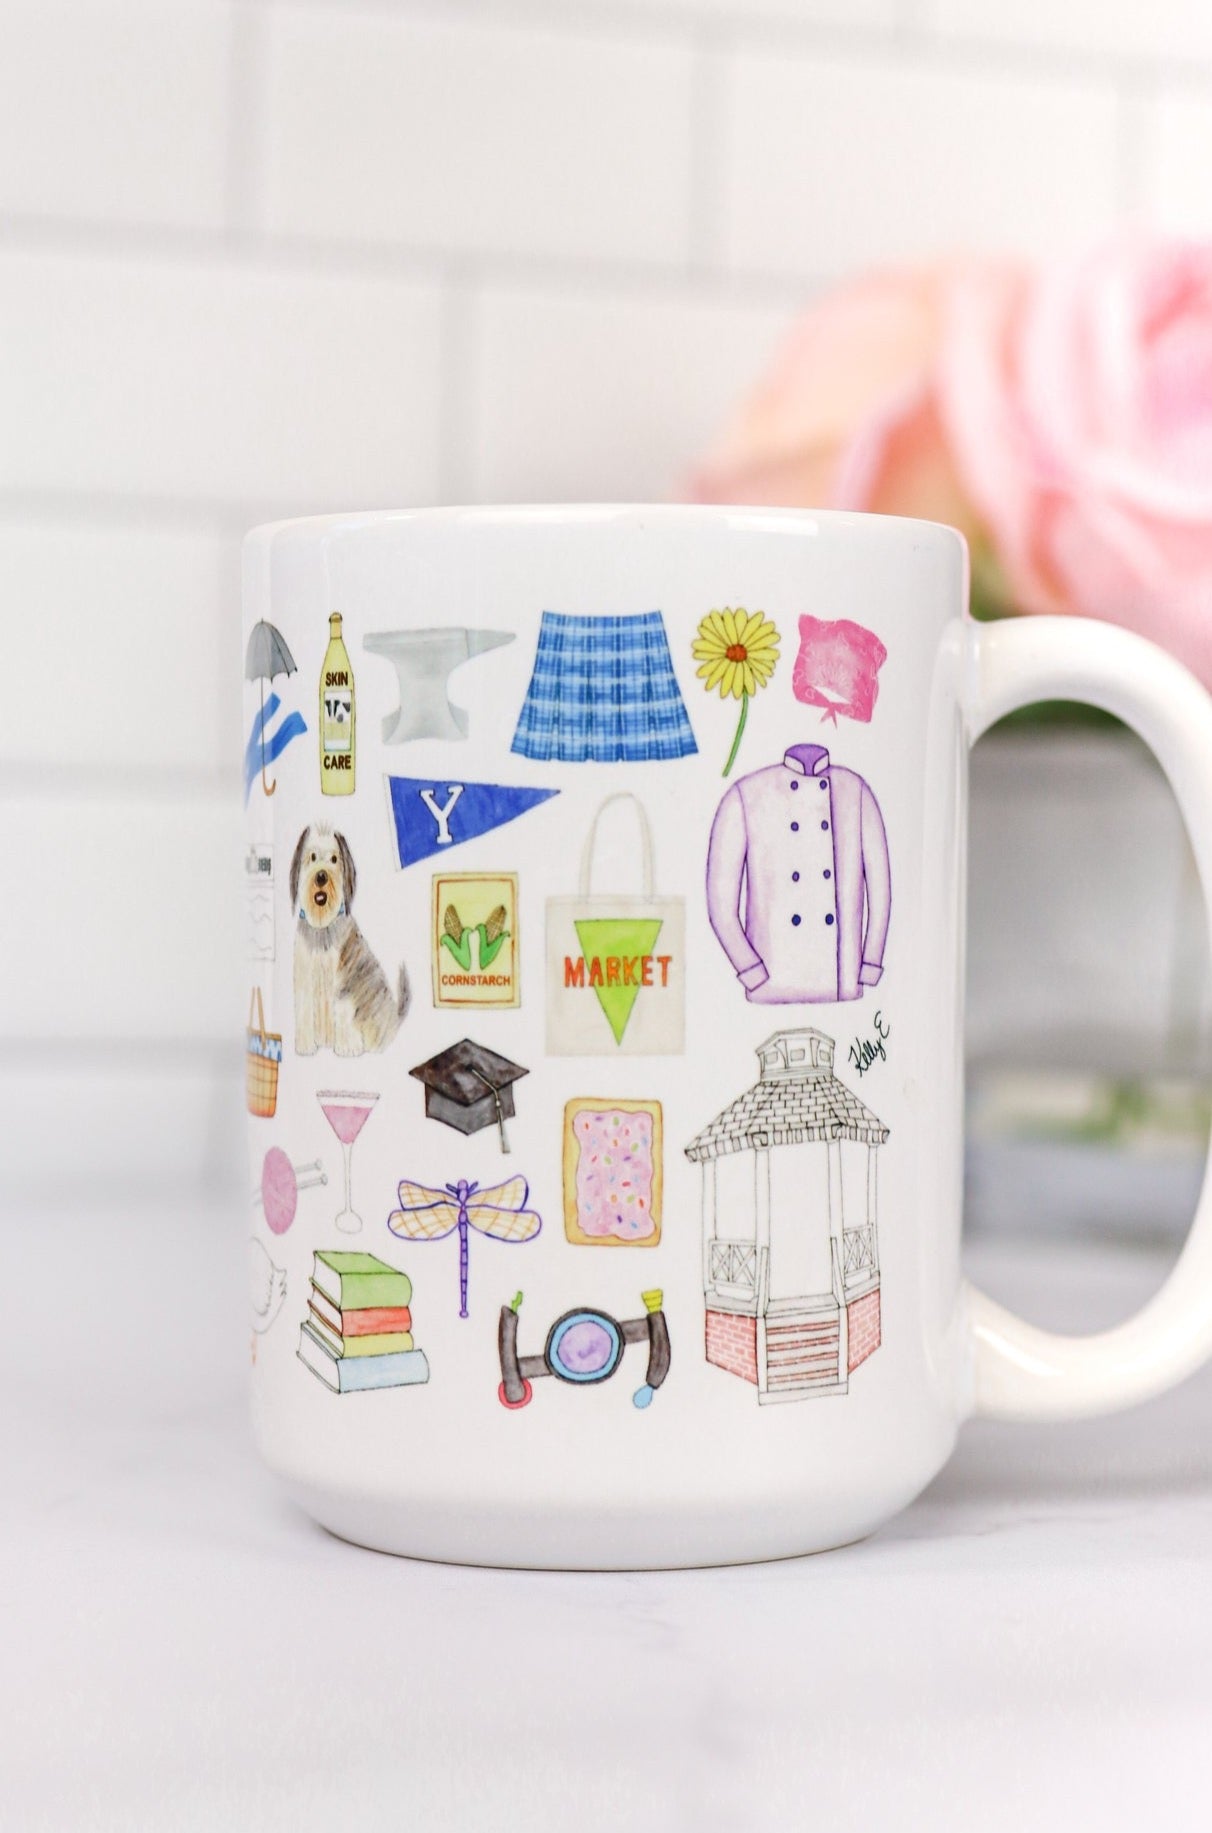 Gilmore Girls mug. Luke's diner sign, Sookie's chef jacket, the Stars Hollow Gazebo and town sign, the Dragonfly Inn, poptarts, bop it, Yale, Kim's Antiques, Paul Anka, the love rocket, Luke's hat, the feather hammer, the Jeep, oy with the poodles already, and many more favorites